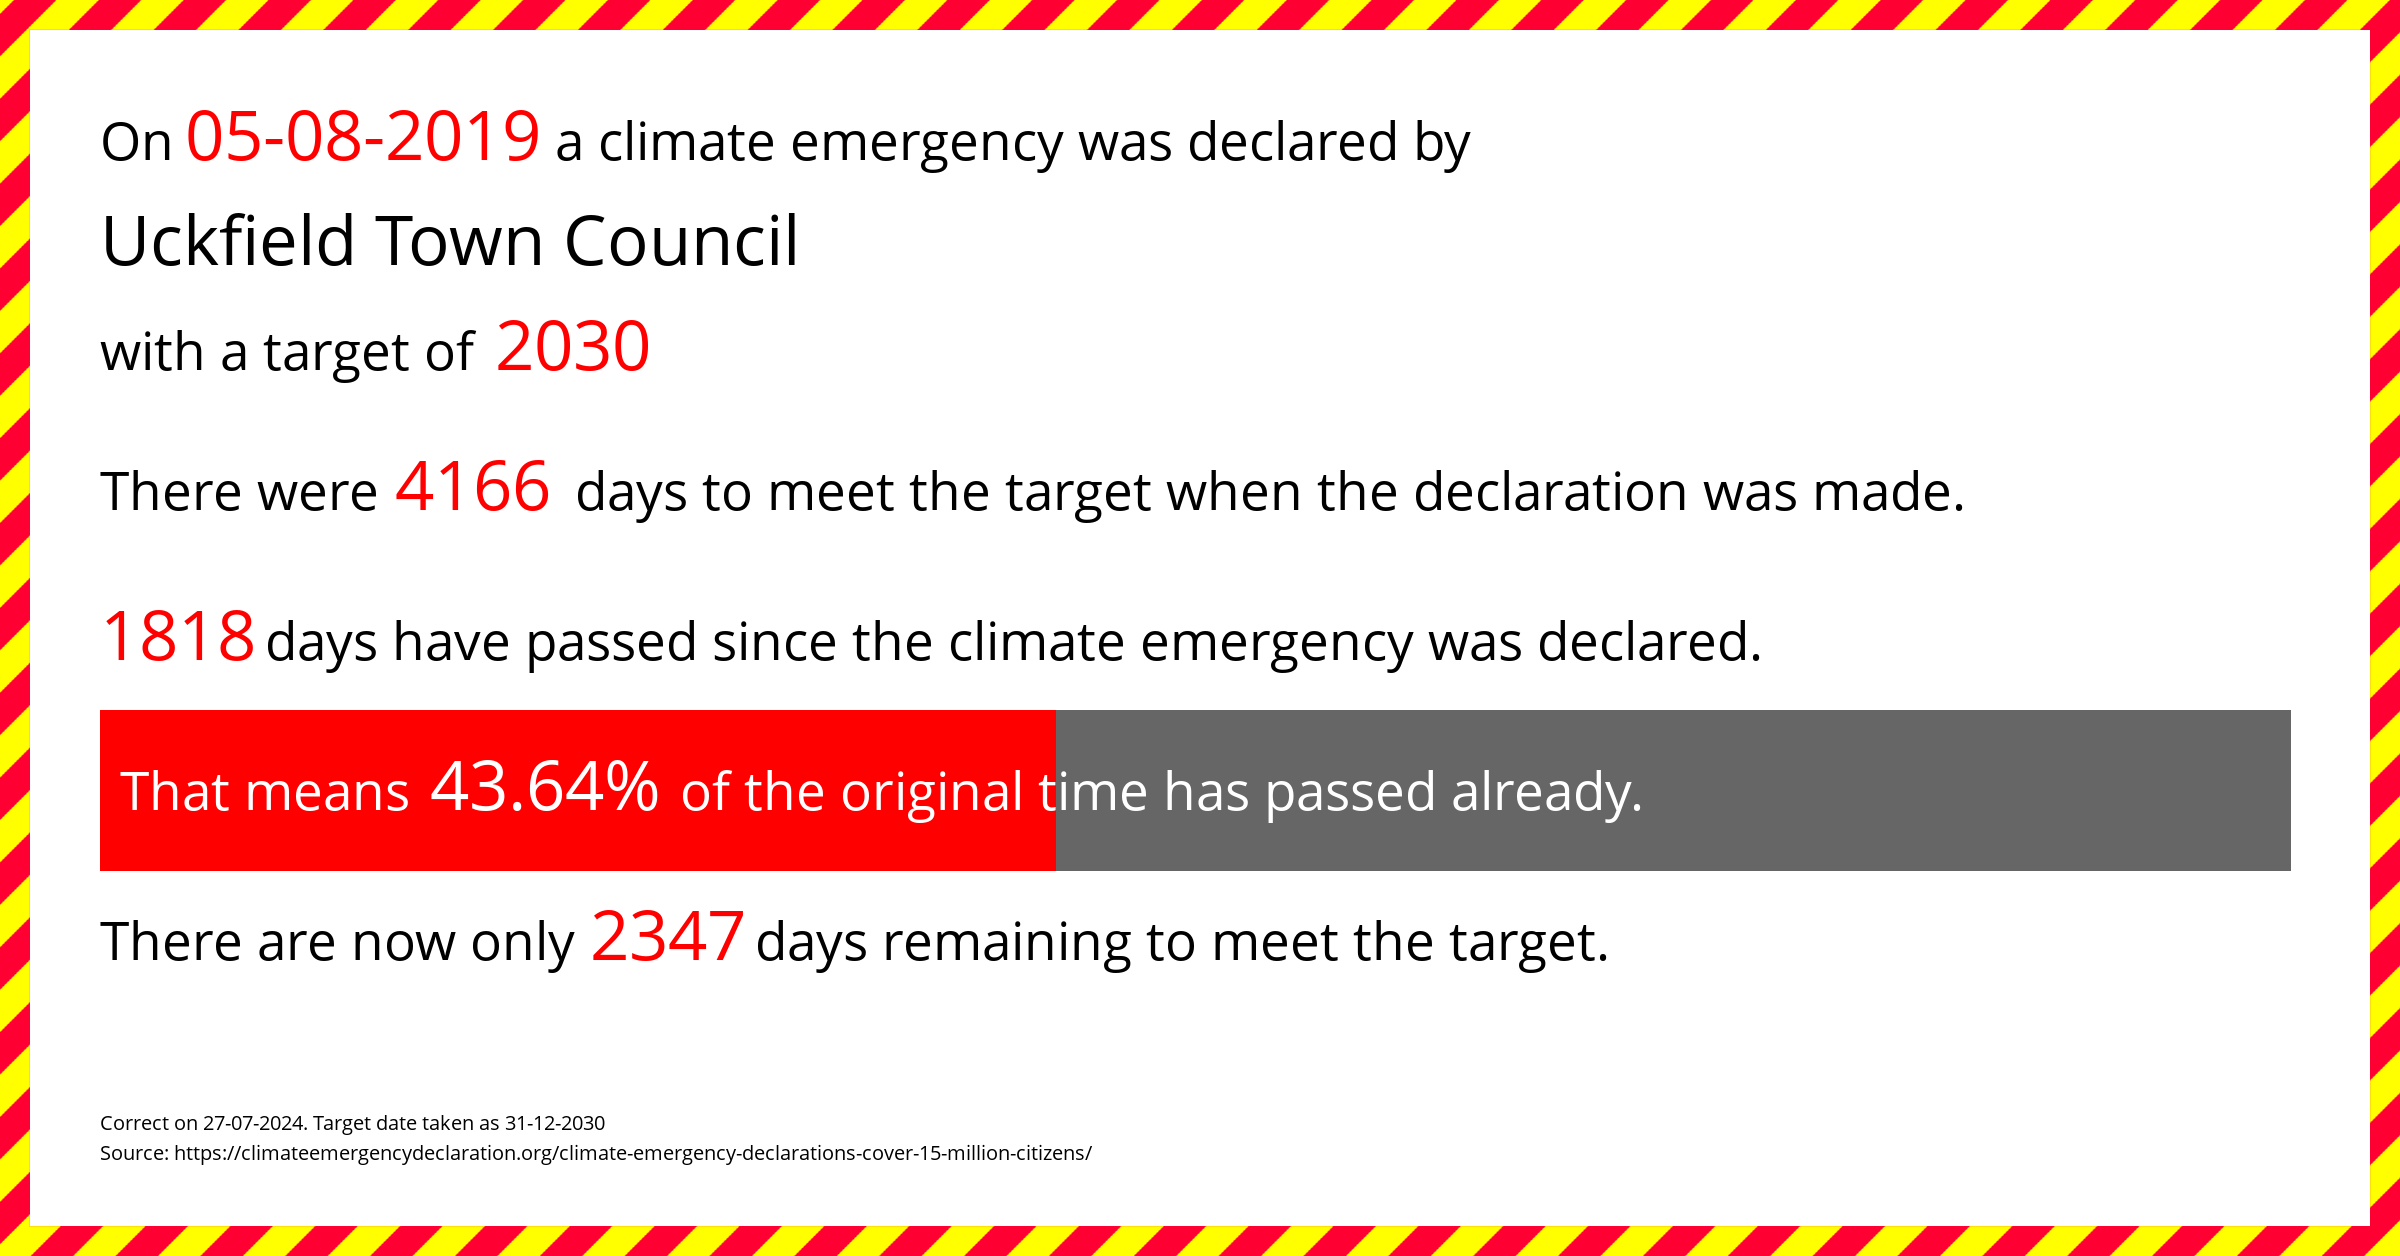 Uckfield Town Council  declared a Climate emergency on Monday 5th August 2019, with a target of 2030.